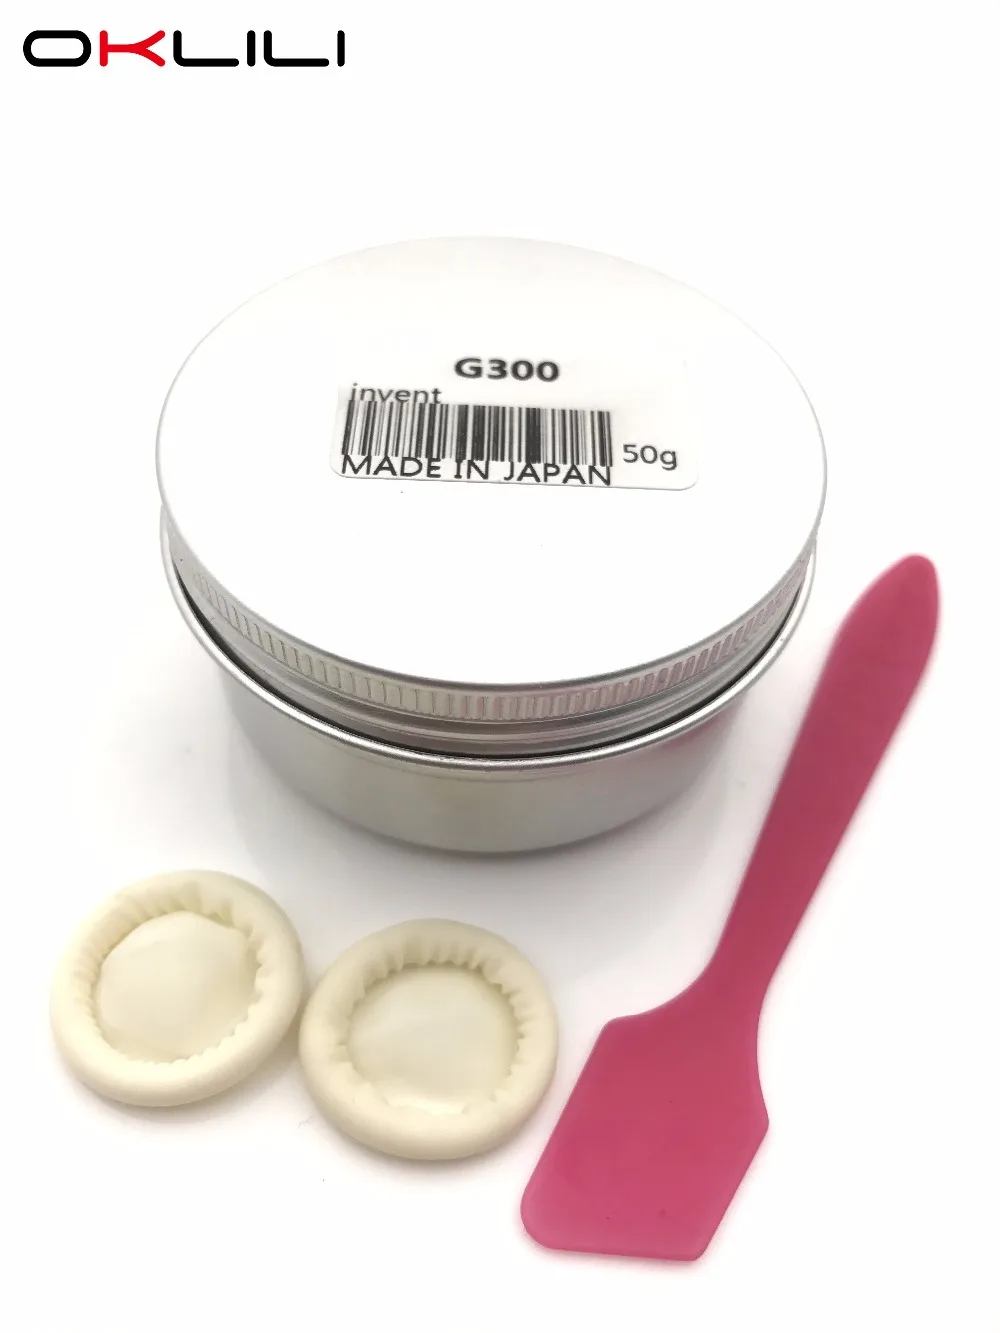 1X JAPAN G300 Fuser Grease Oil Silicone Grease 50g for HP 1010 1020 1000 1022 1320 P2015 P1005 P1007 P1008 1100 1200 1220 2200